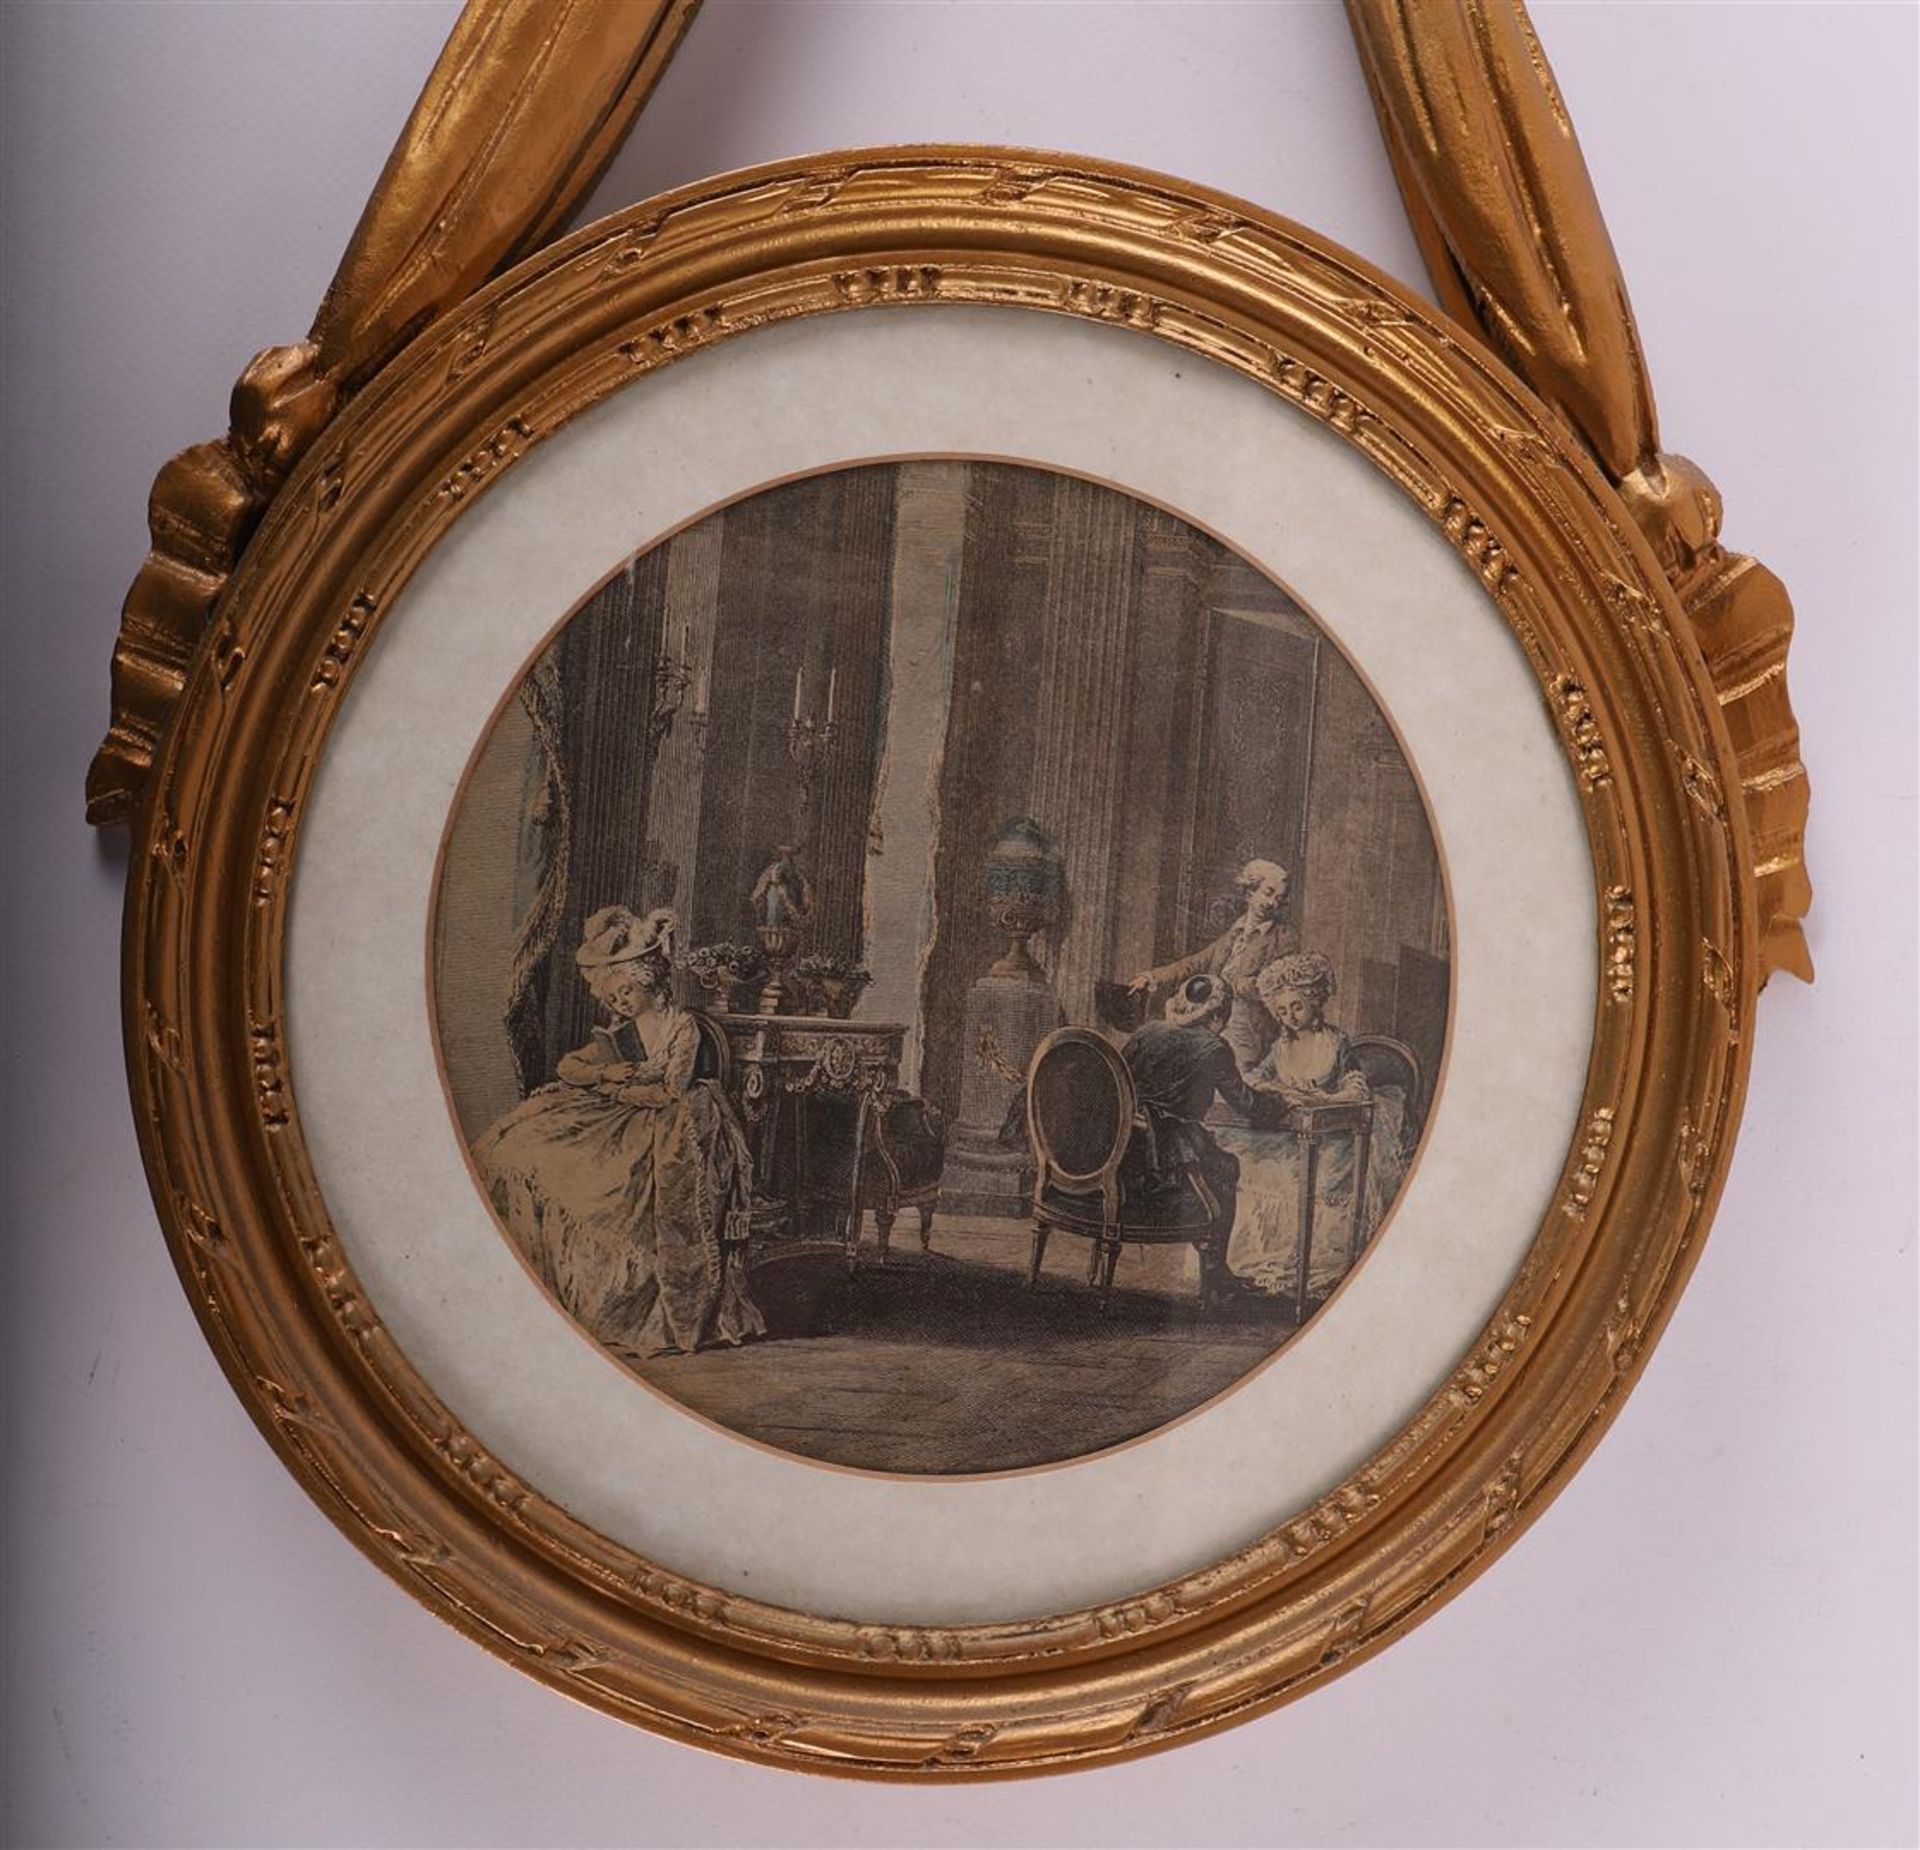 A set of round gilt wooden frames with bow ornament, 19th century. - Image 3 of 3